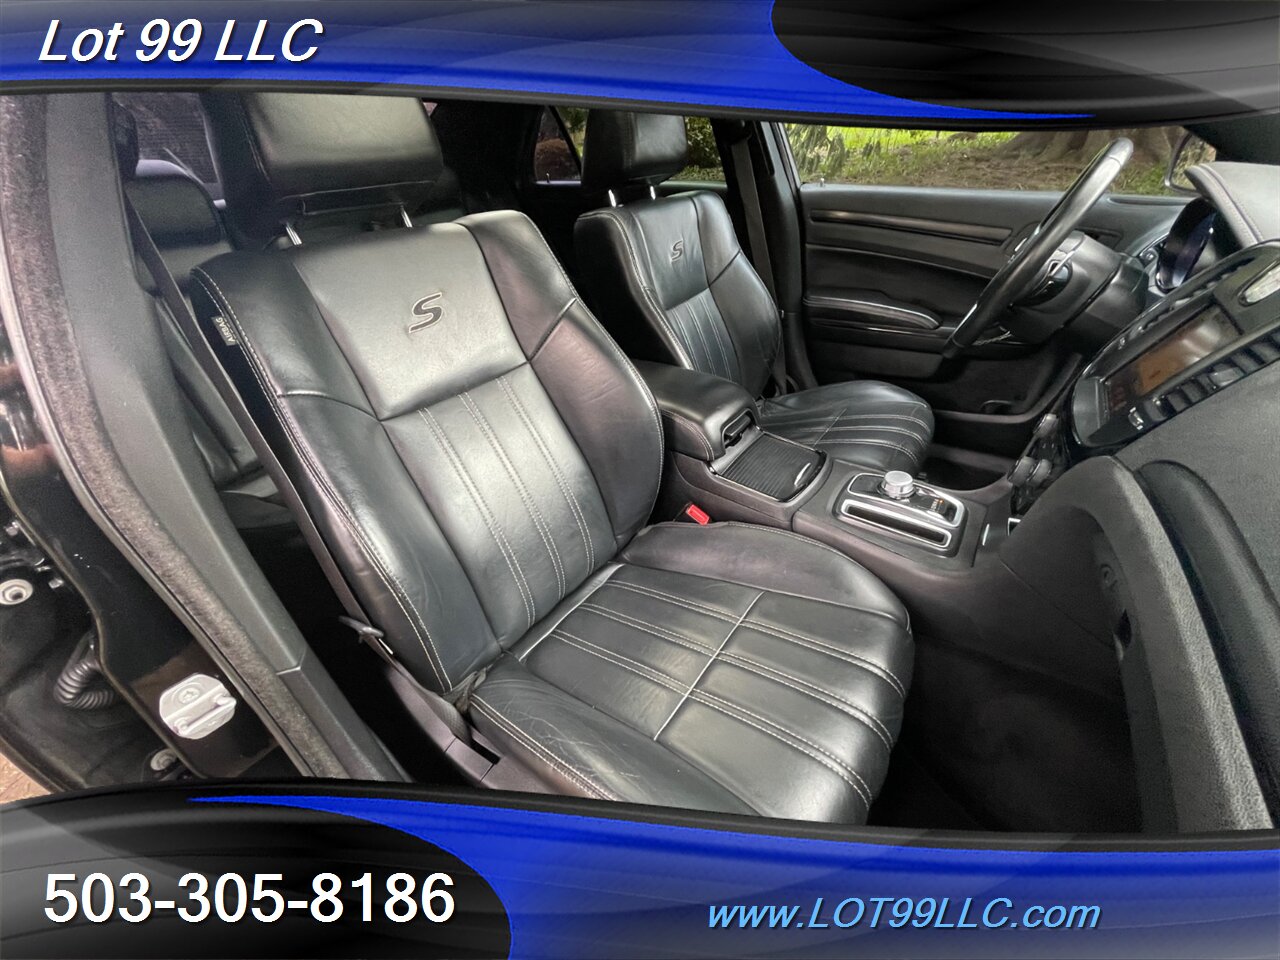 2015 Chrysler 300 Series S Only 86k Miles  Navi Pano HTD Leather 31MPG   - Photo 43 - Milwaukie, OR 97267